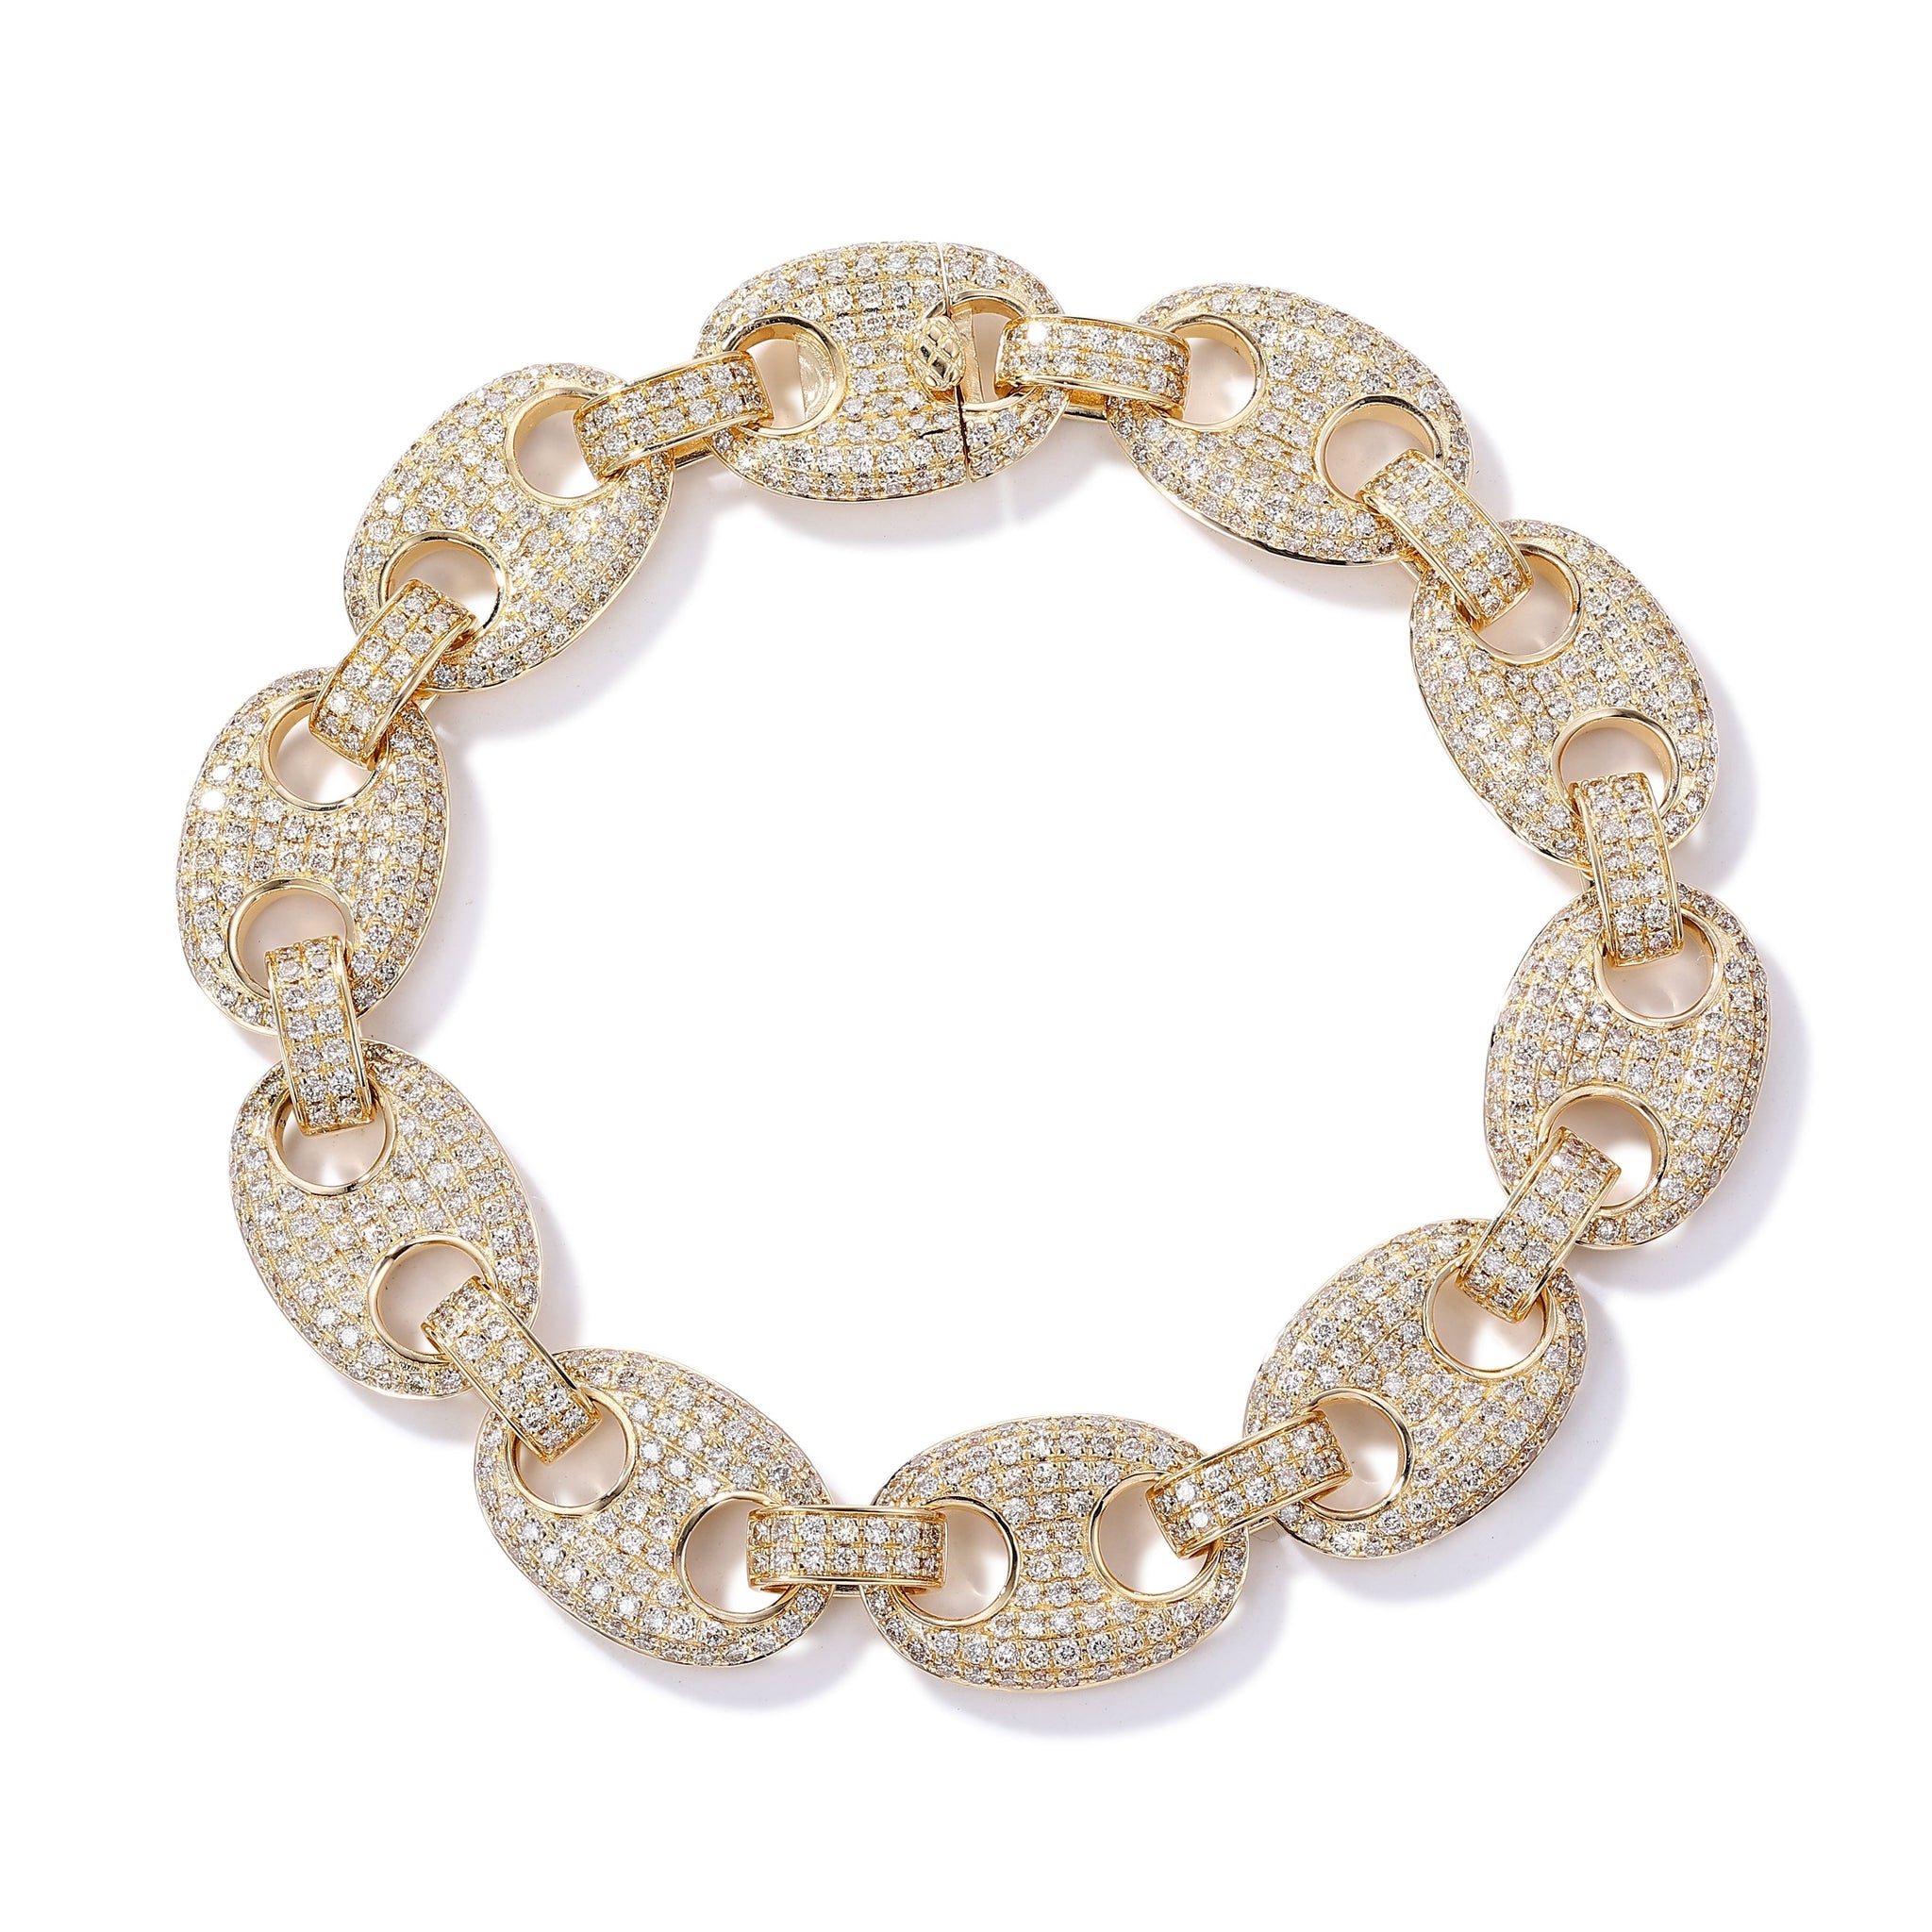 13mm Iced Out Gucci Link Bracelet